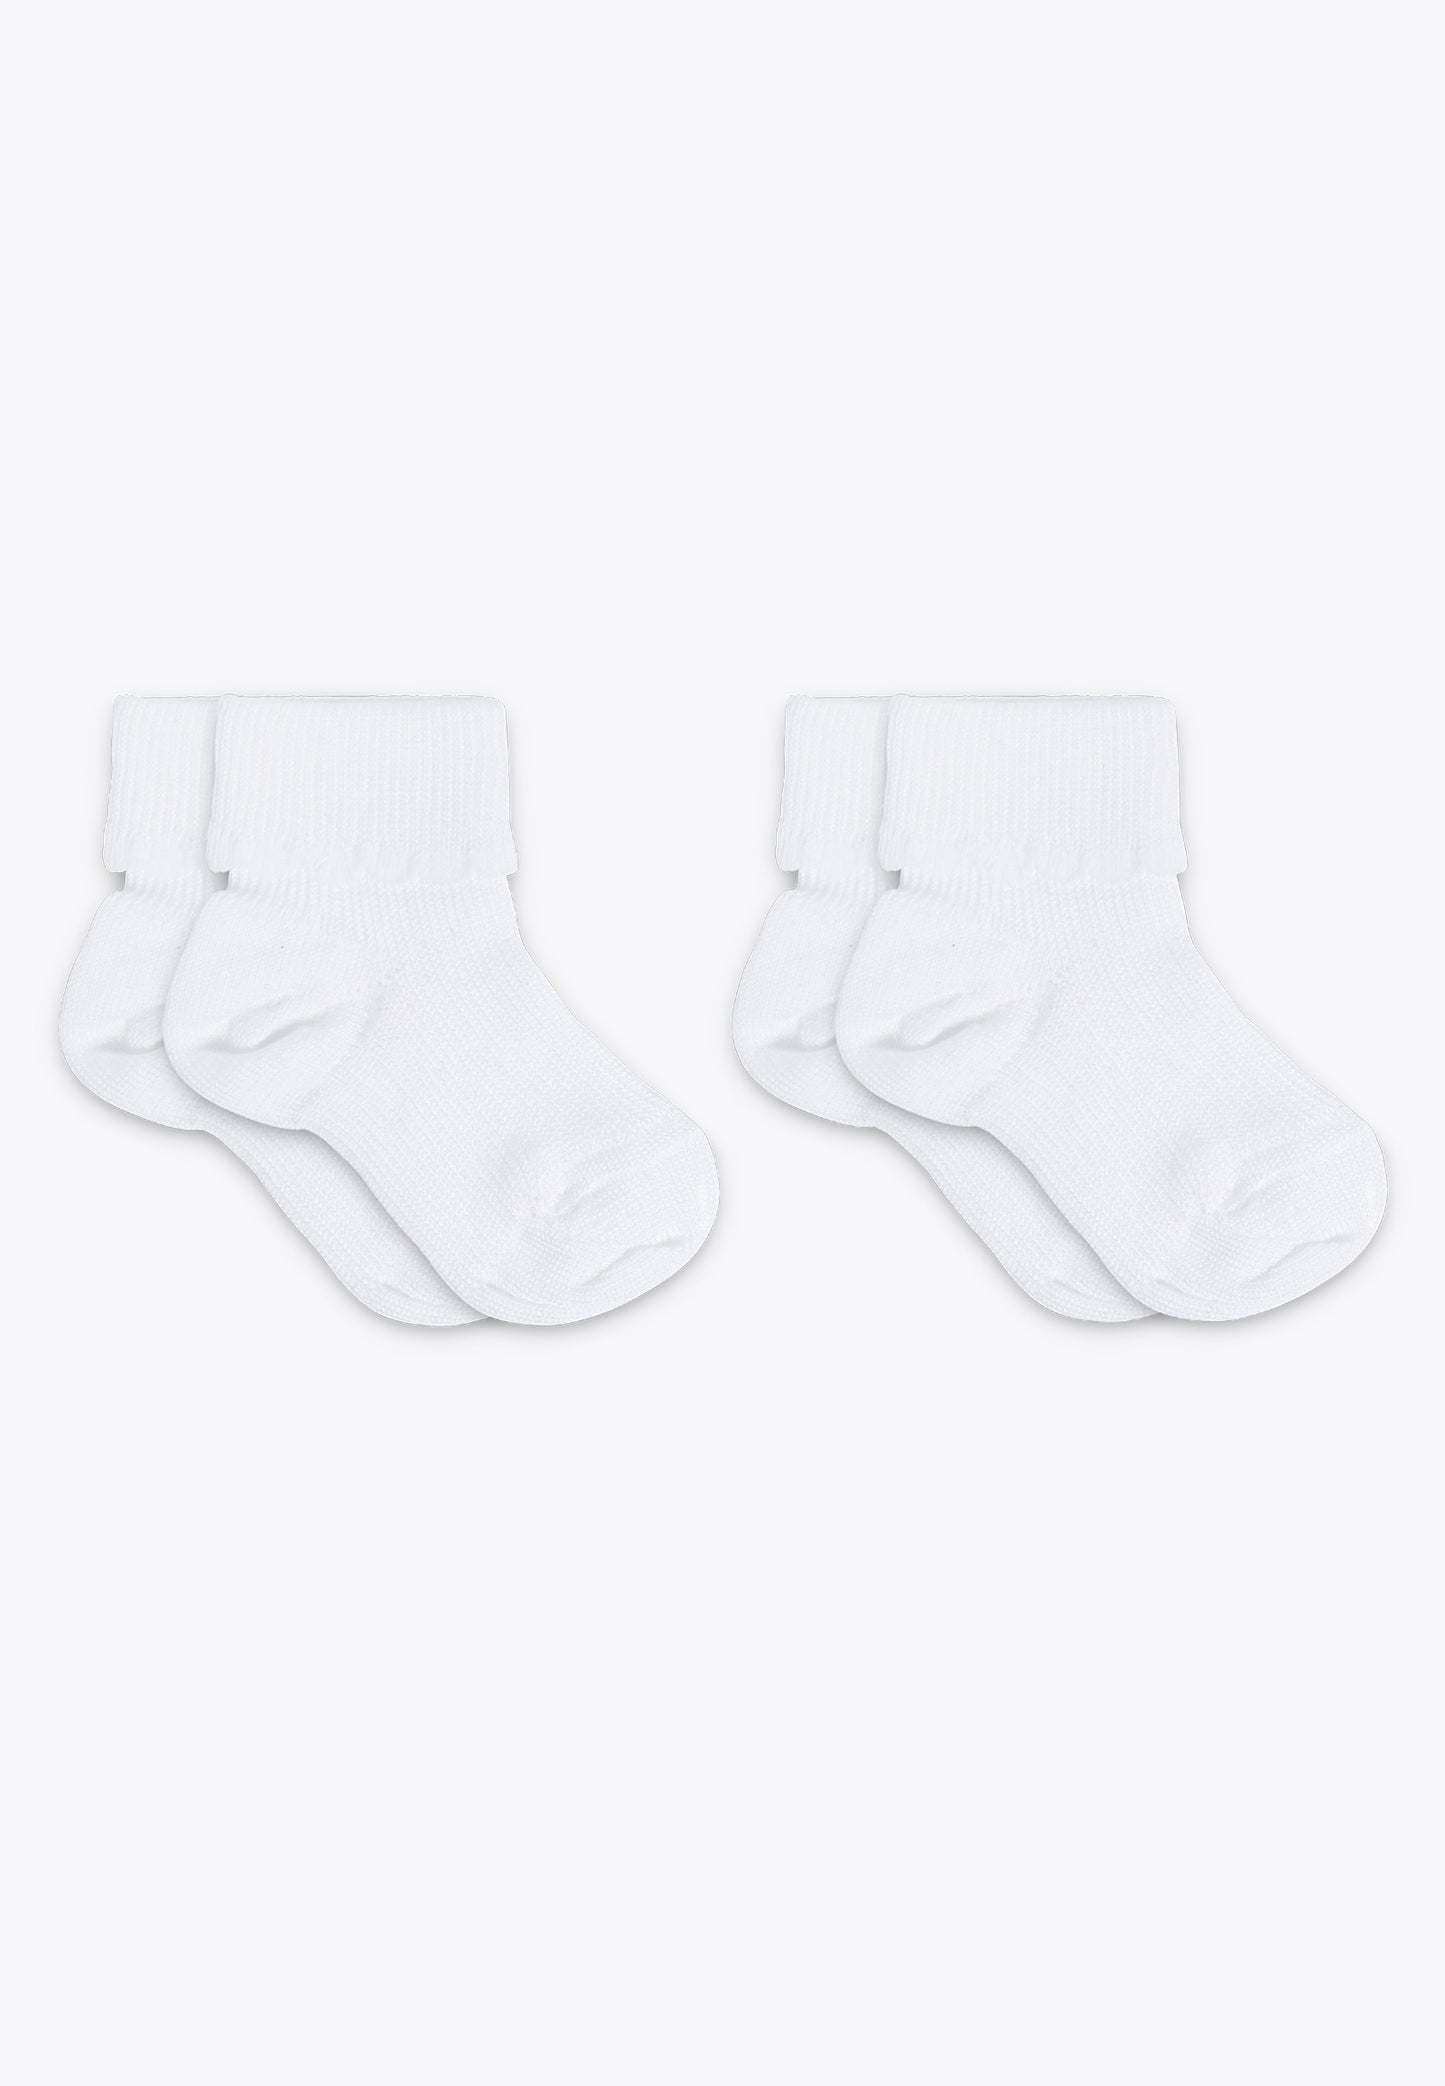 Set of 2 Pairs of First Days Cotton Socks